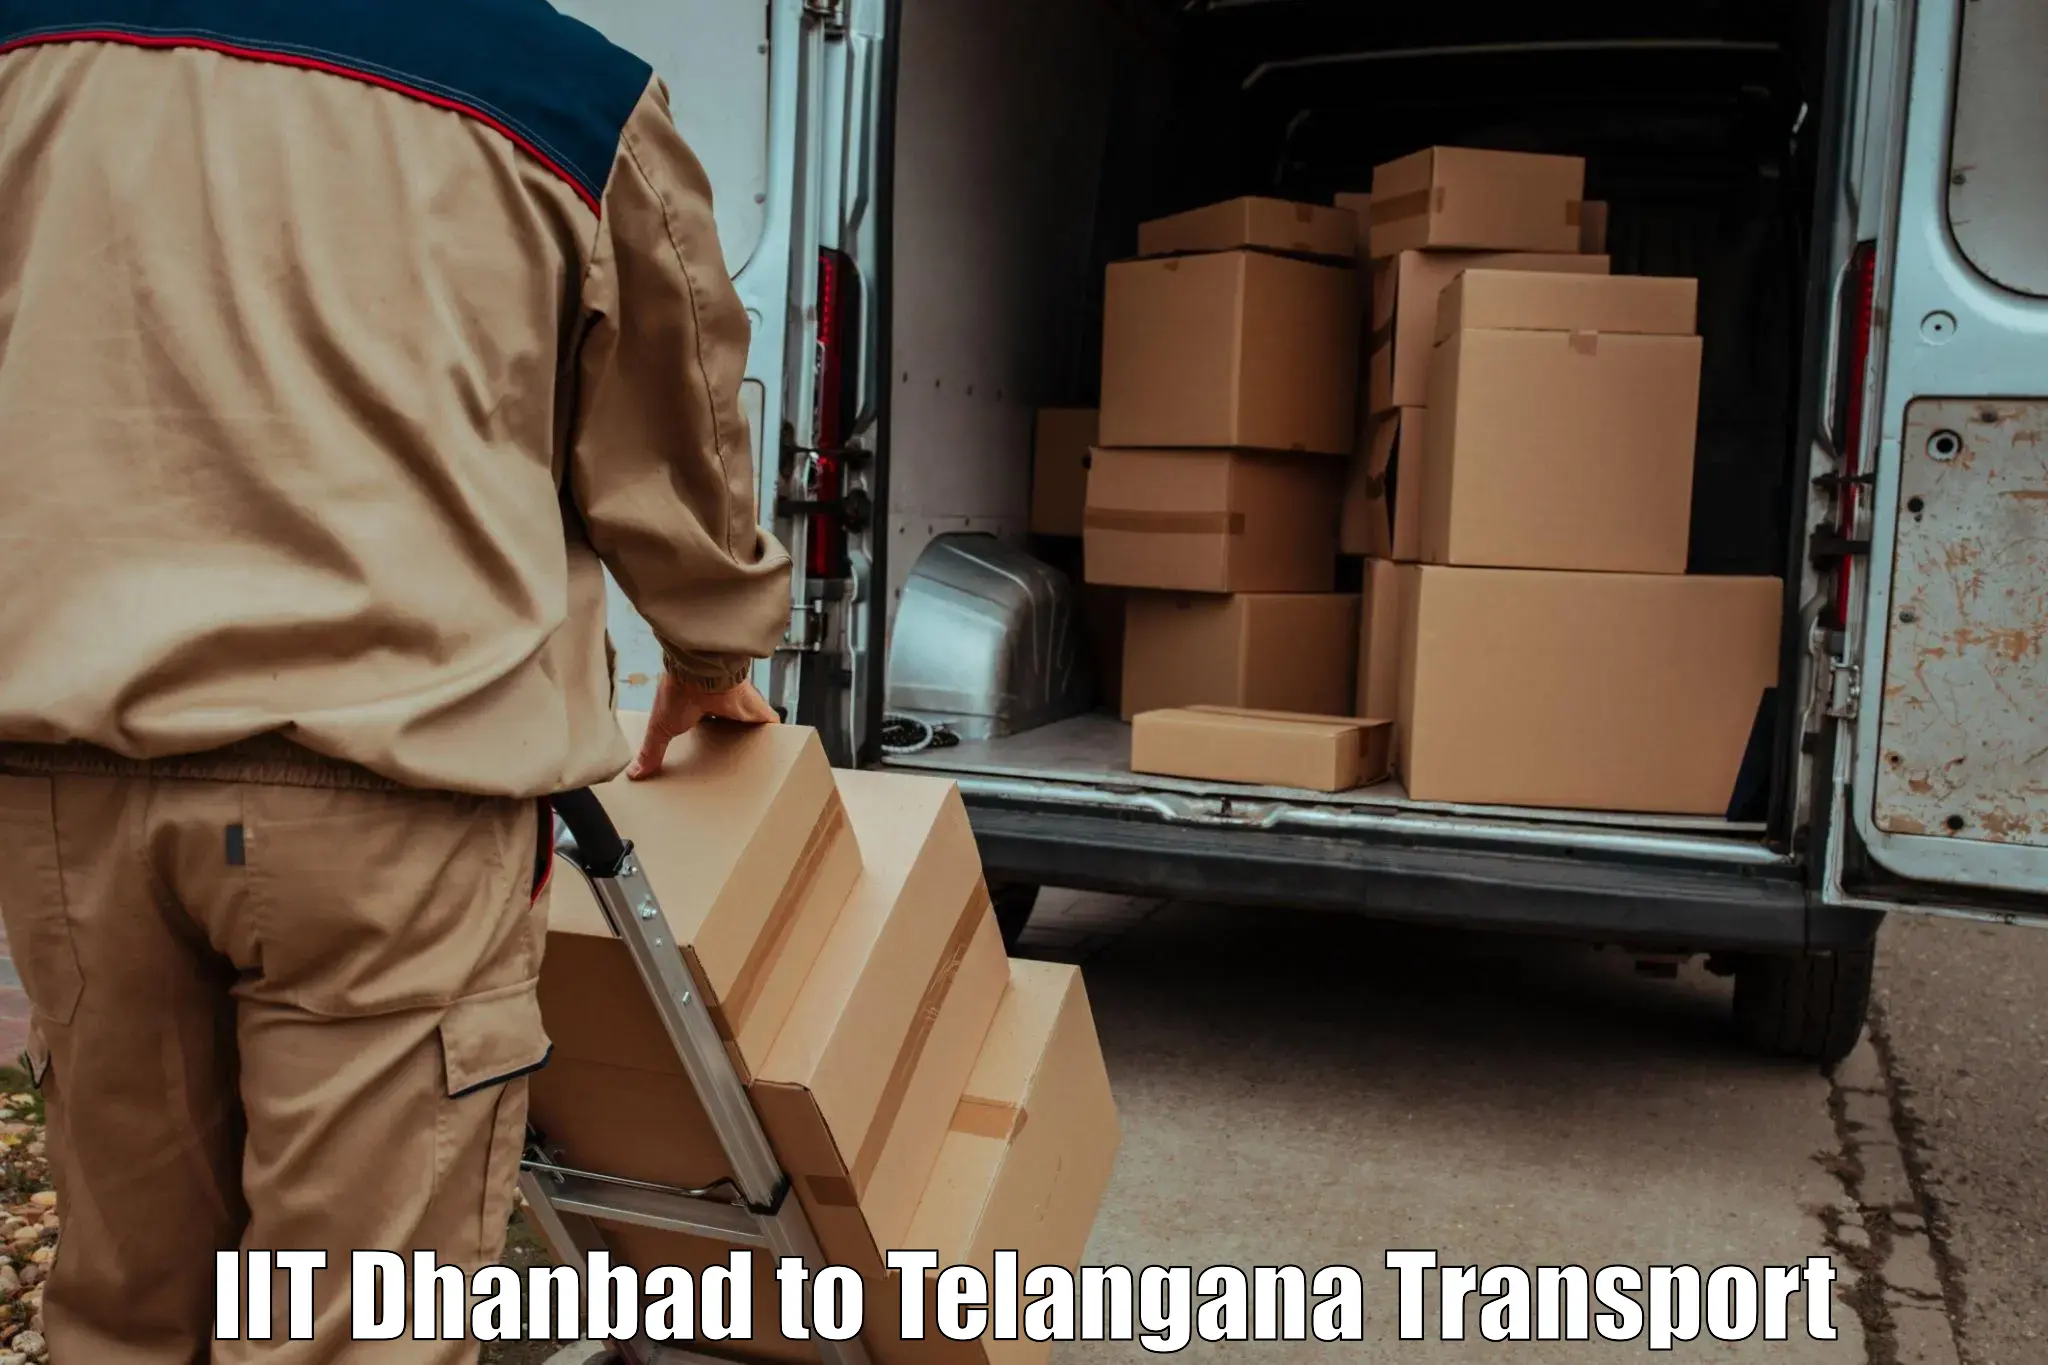 Daily transport service IIT Dhanbad to Khairatabad